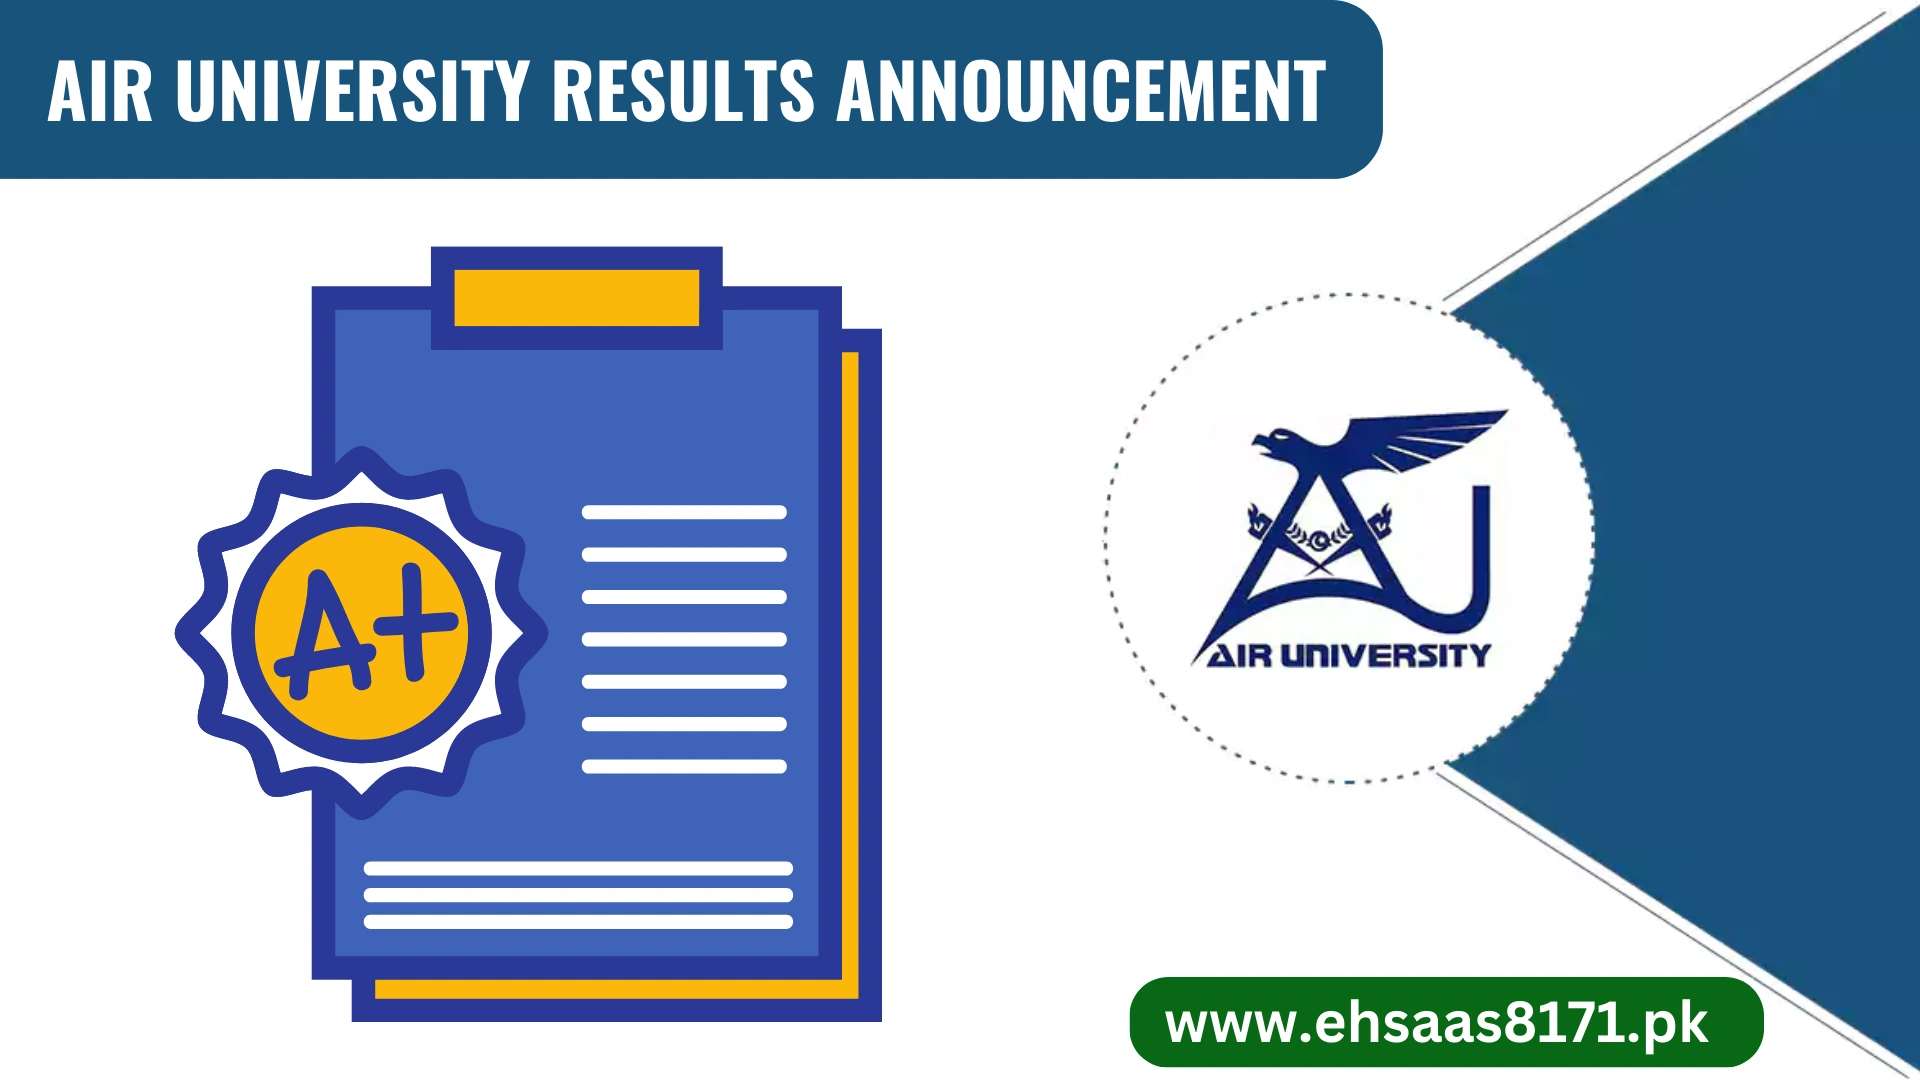 Air University Results Announcement